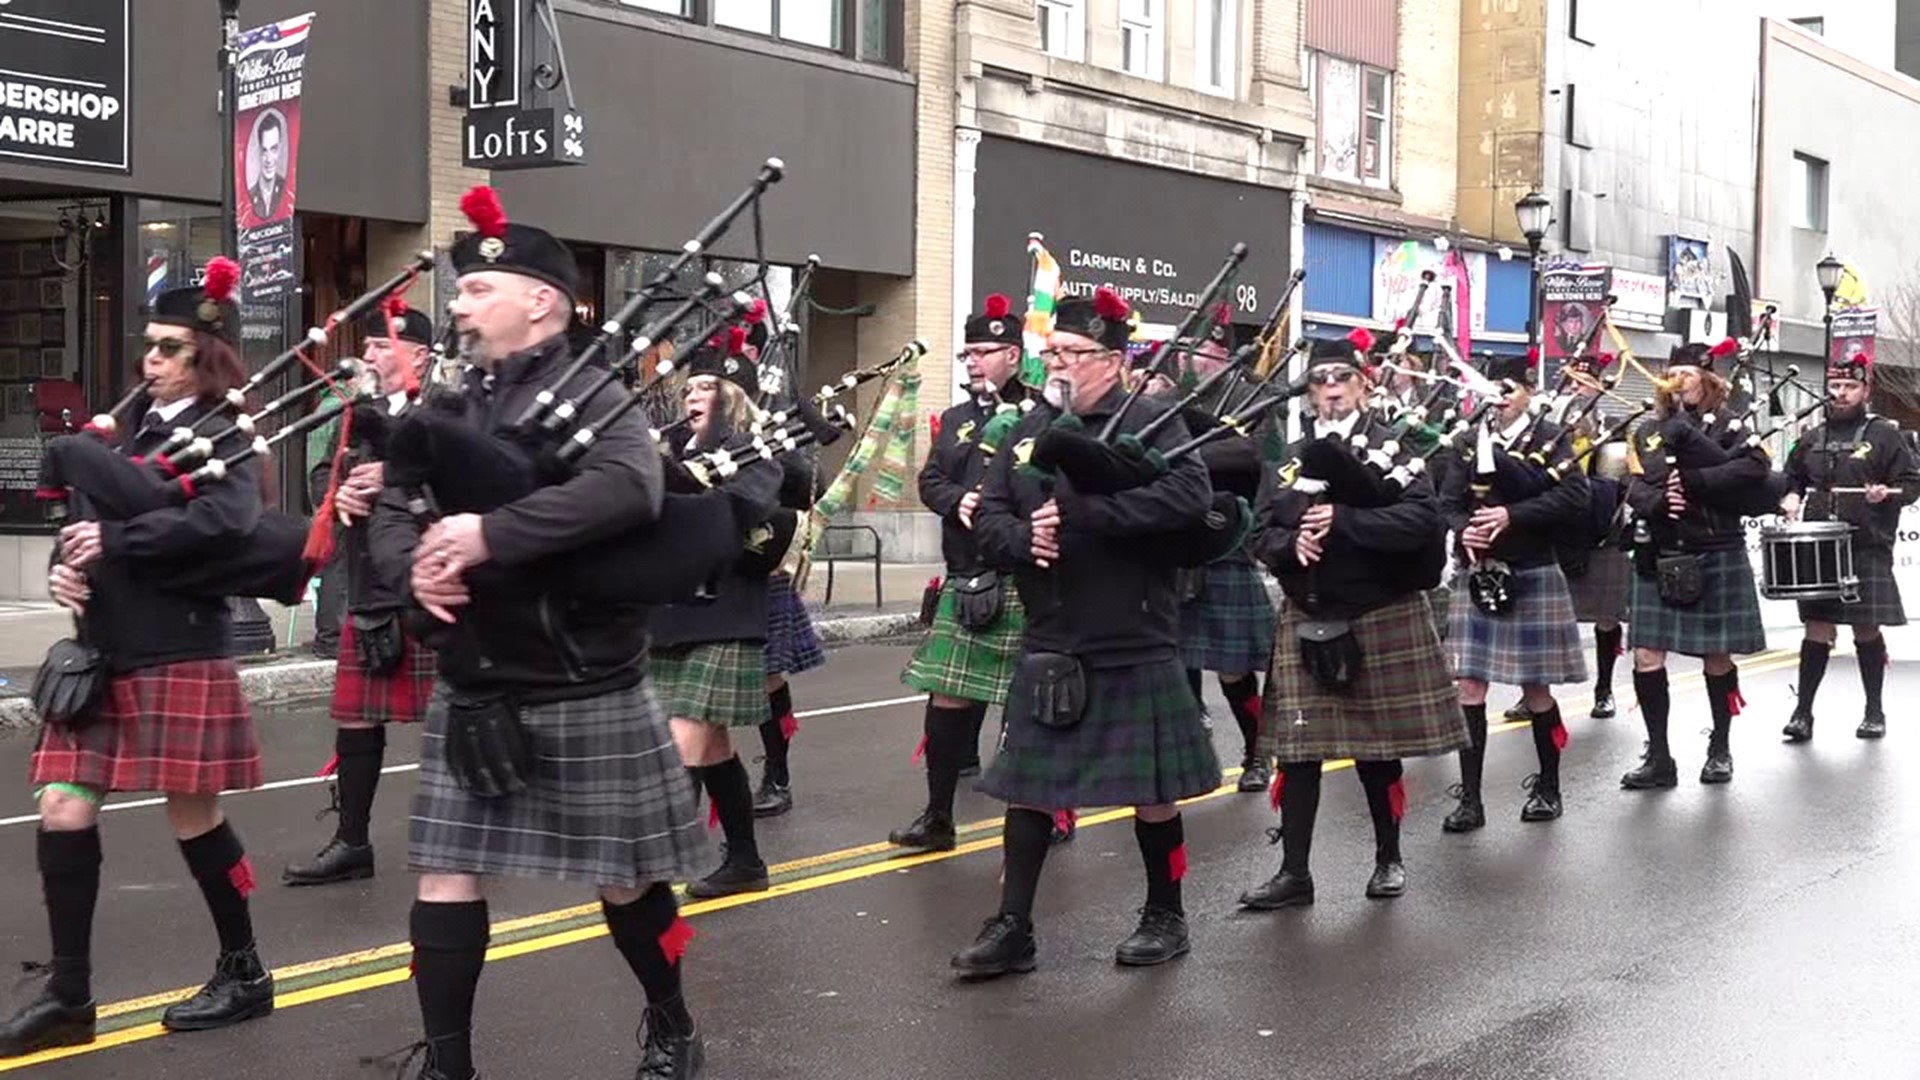 It has been a weekend of parades, and on Sunday, it was the Diamond City's turn to enjoy some St. Patrick's festivities.